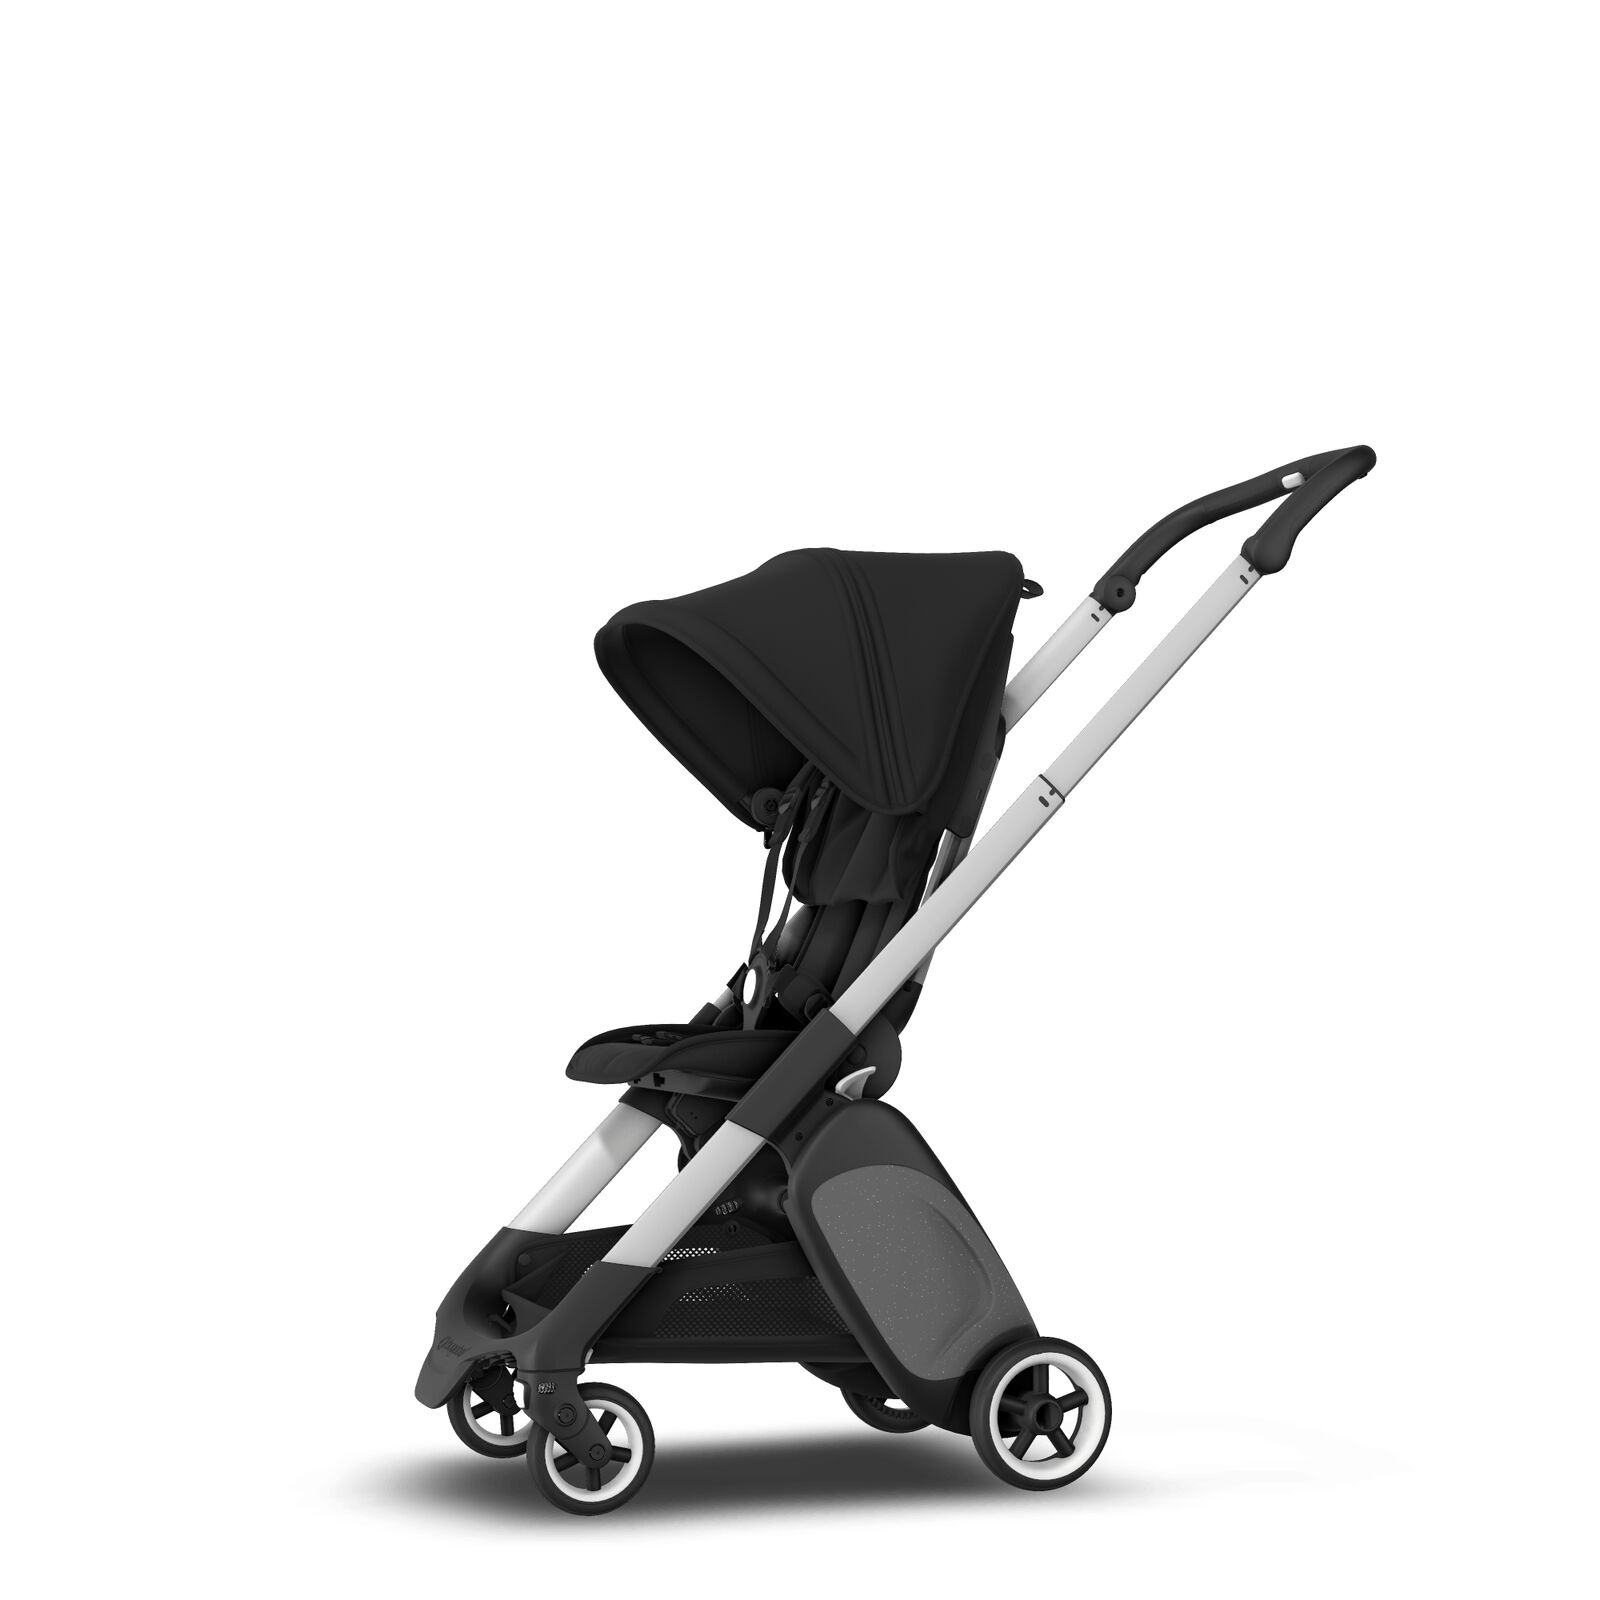 Bugaboo Ant ultra compact stroller - View 2